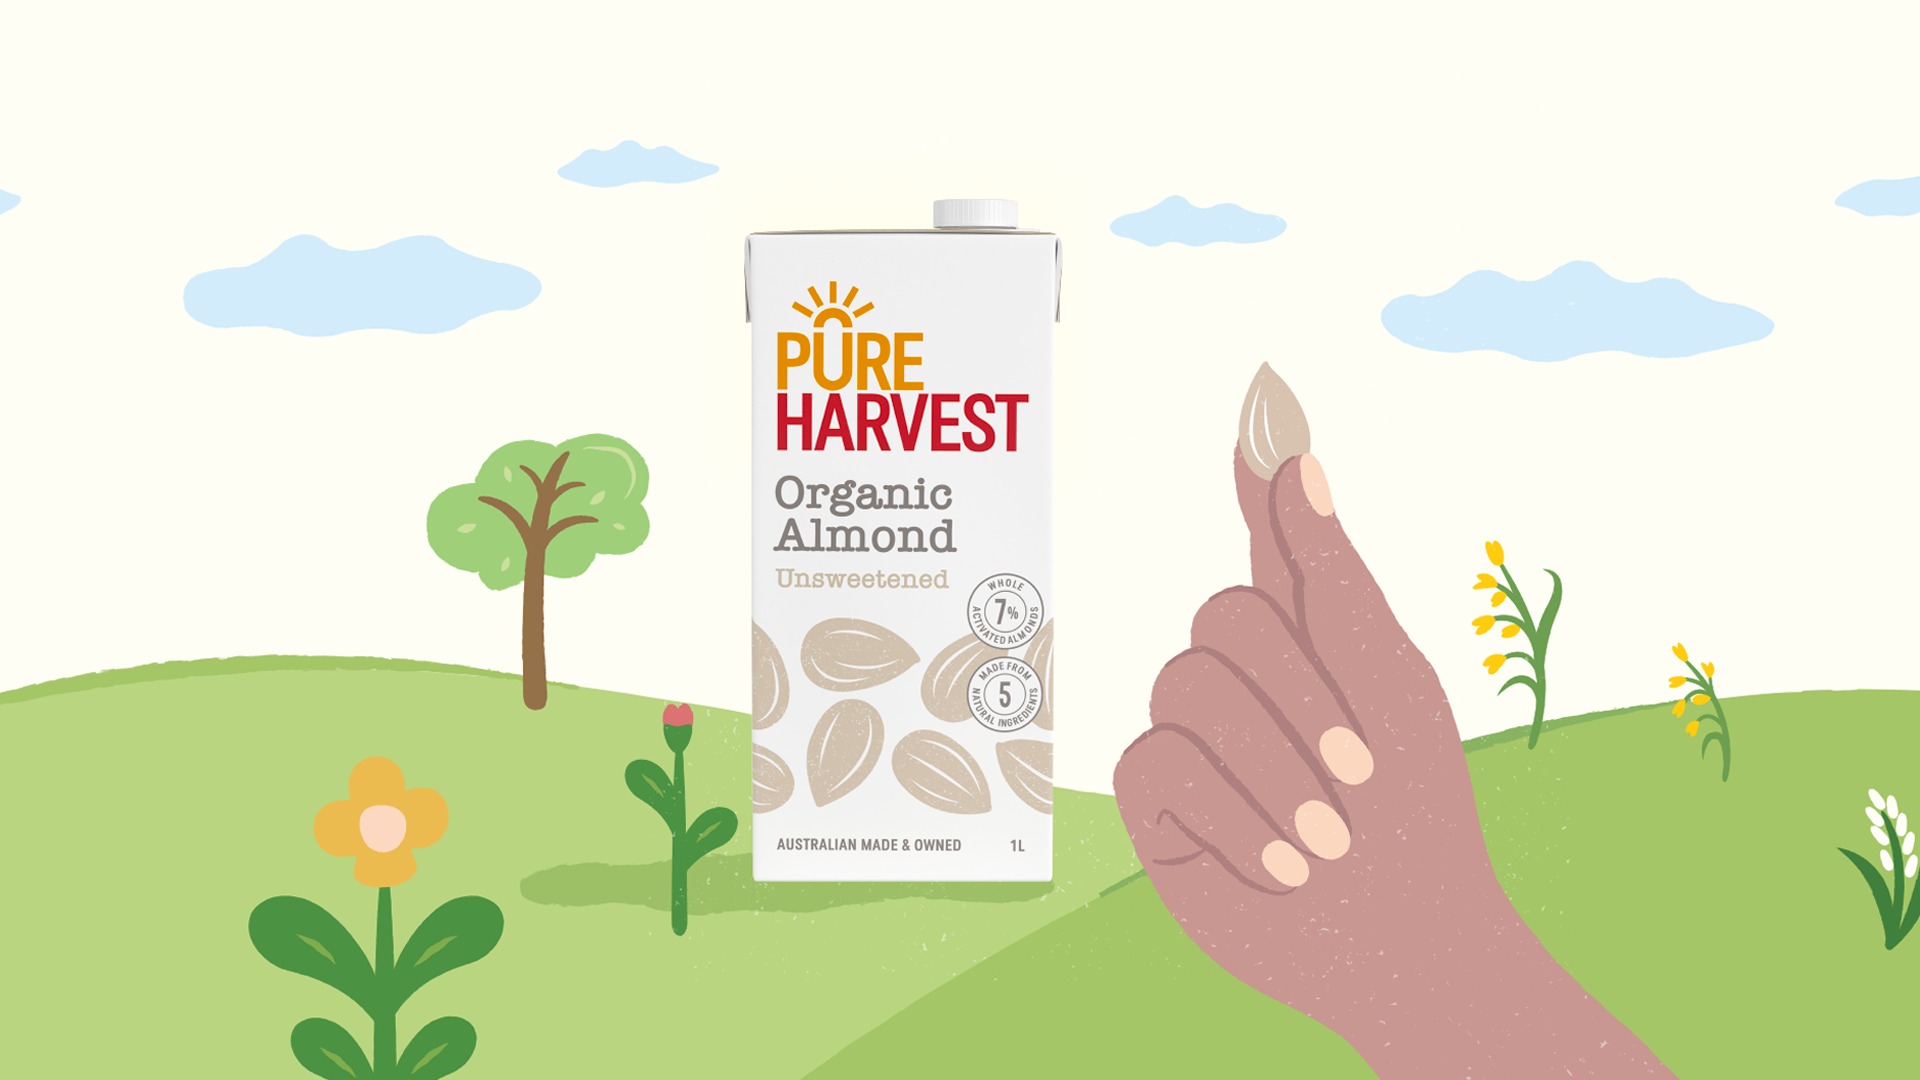 A hand holding a illustrated almond from the organic almond Pure Harvest milk package